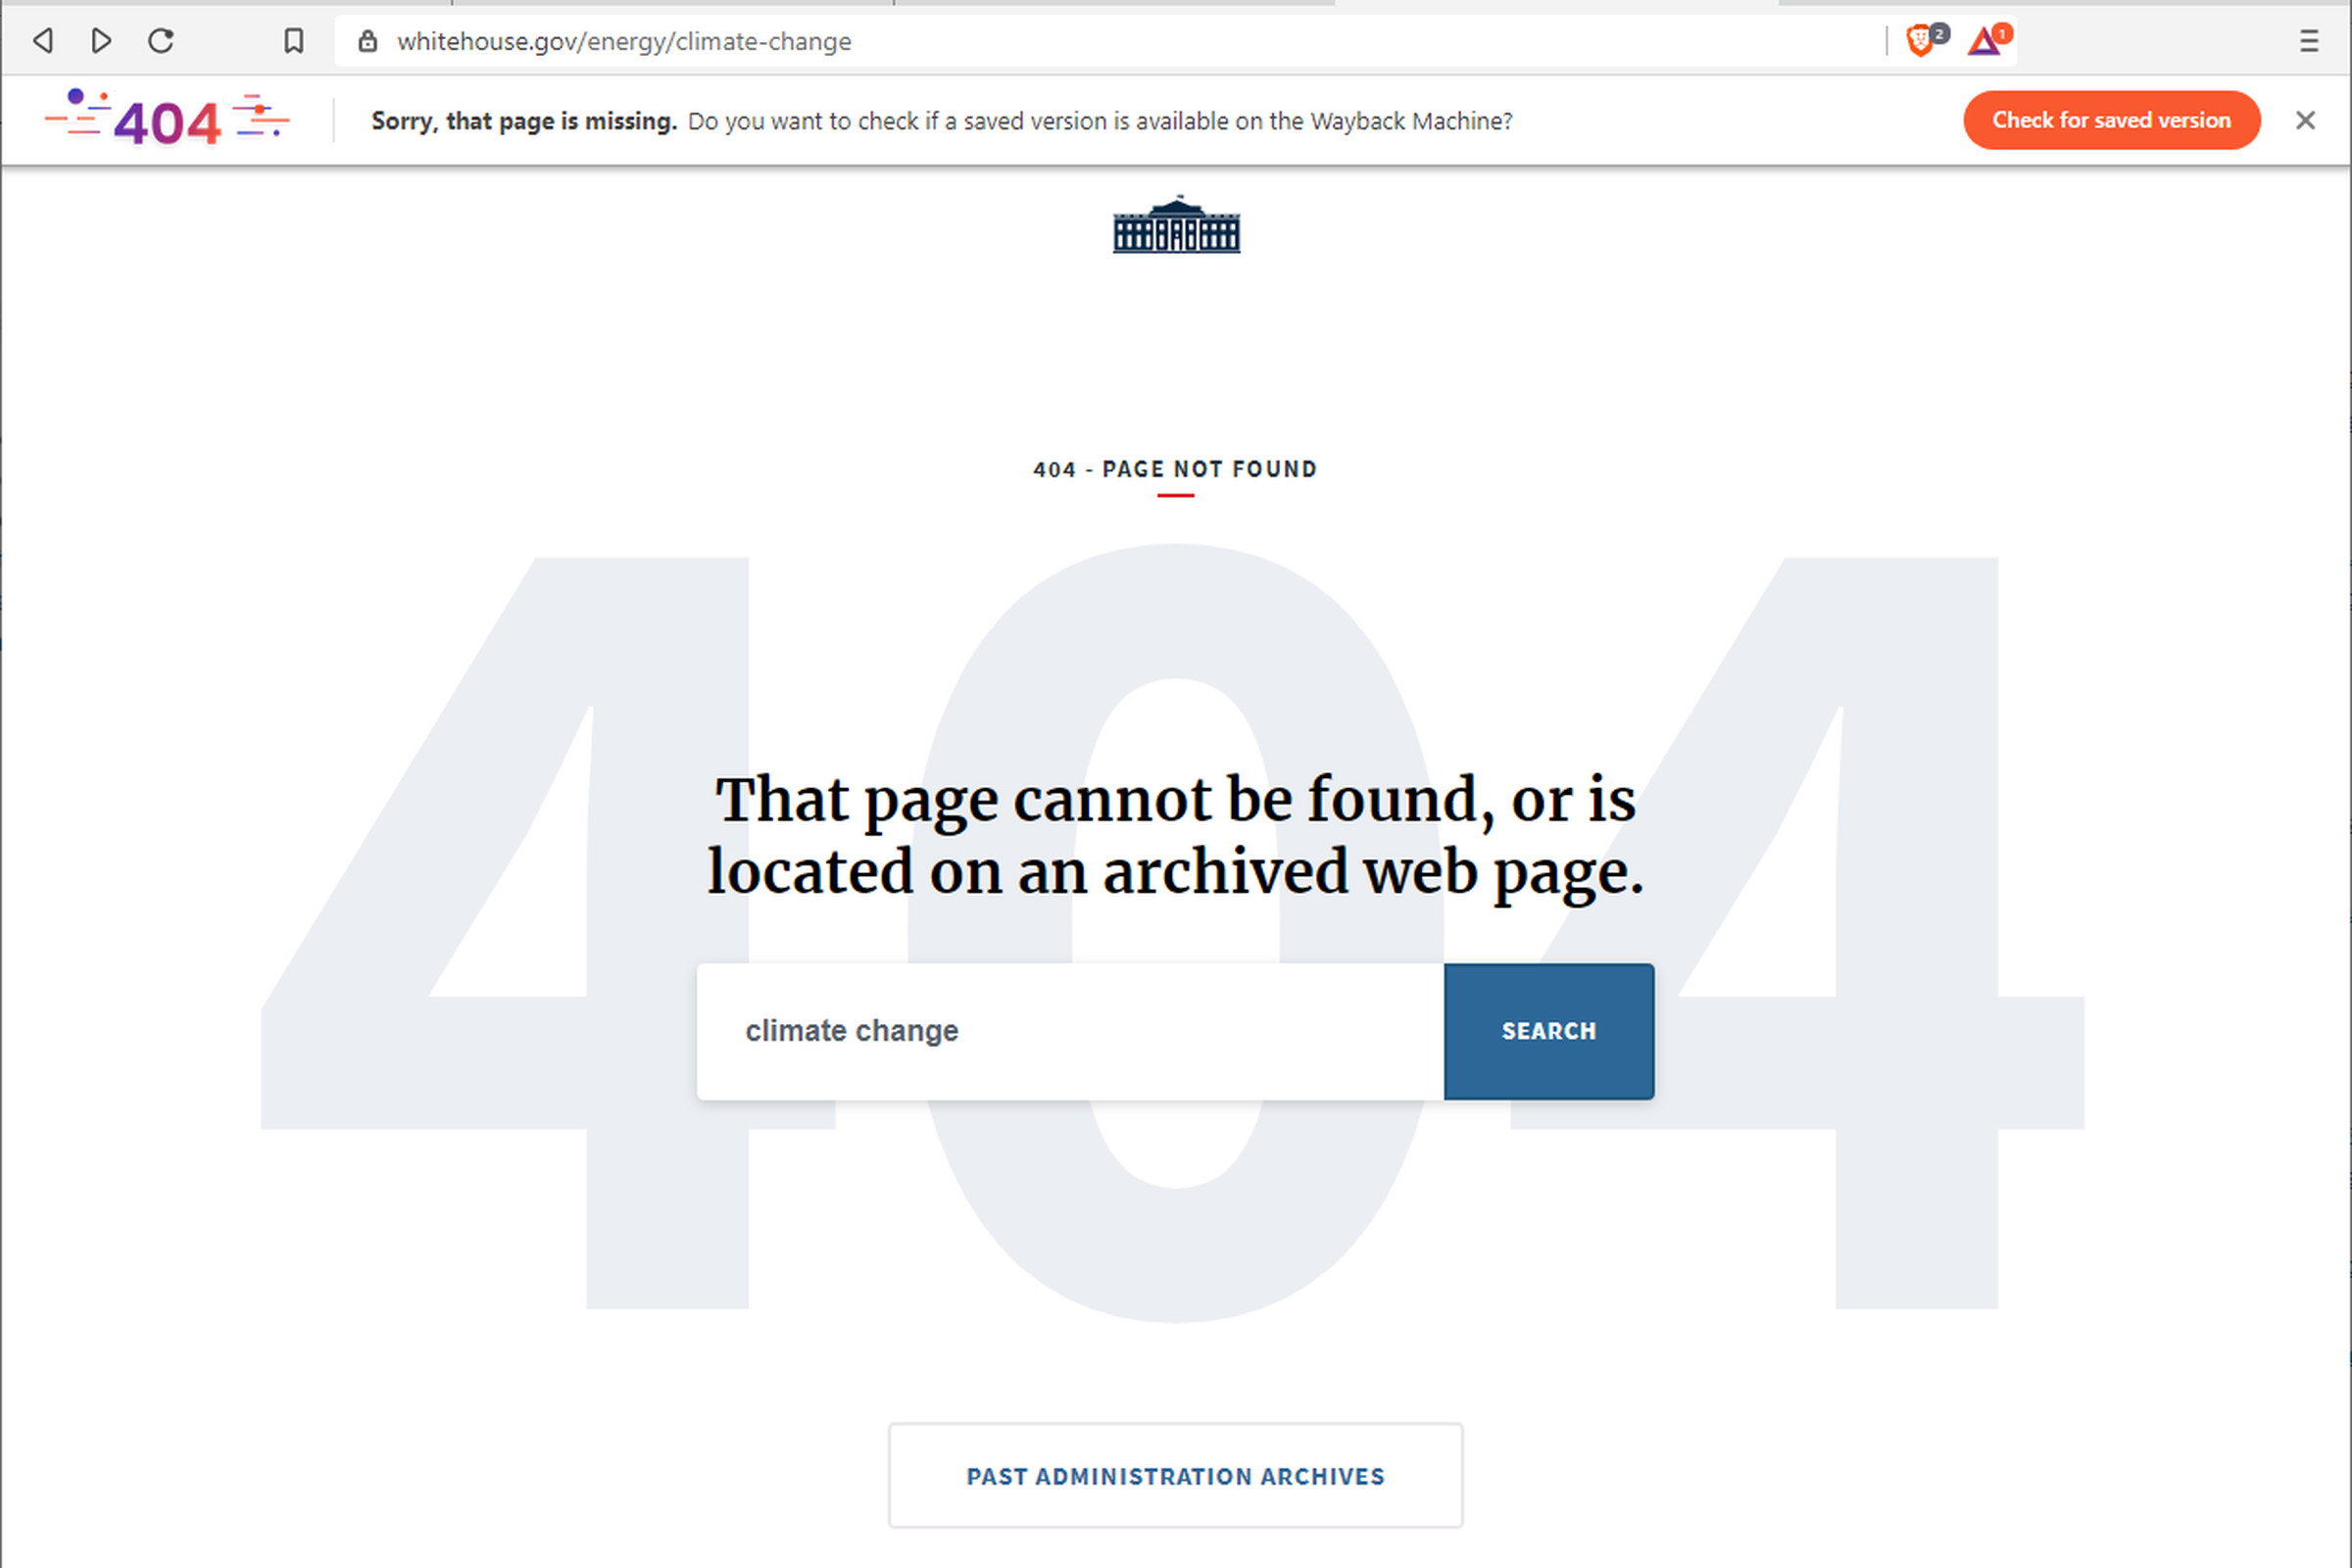 The browser will generate a notification when it detects a 404 error code.